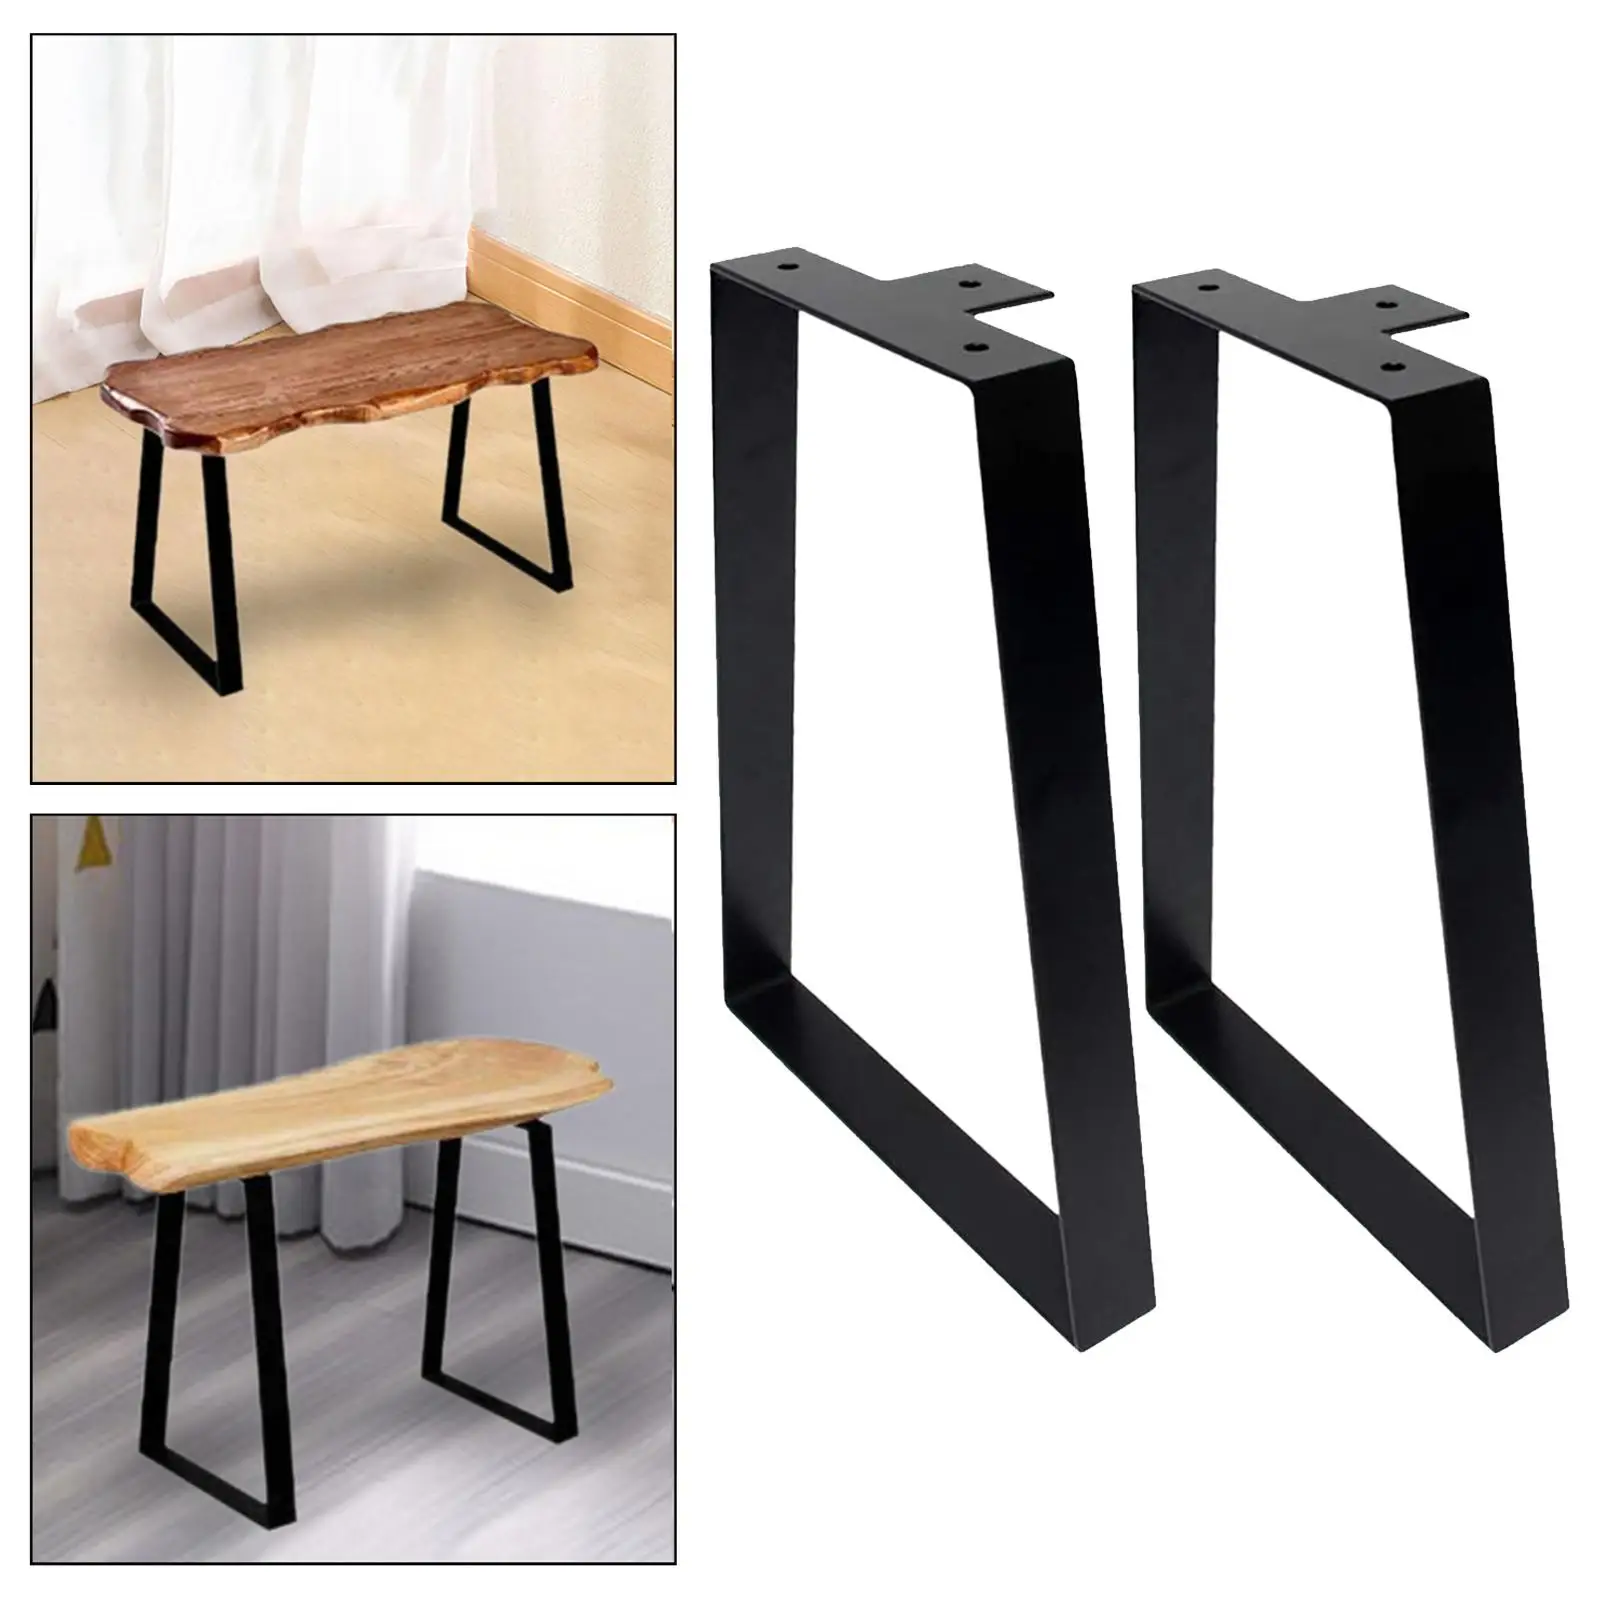 2Pcs Metal Table Legs Furniture Legs Desk Legs Heavy Duty Industrial Bench Legs for Dining Table Night Stands Accessories